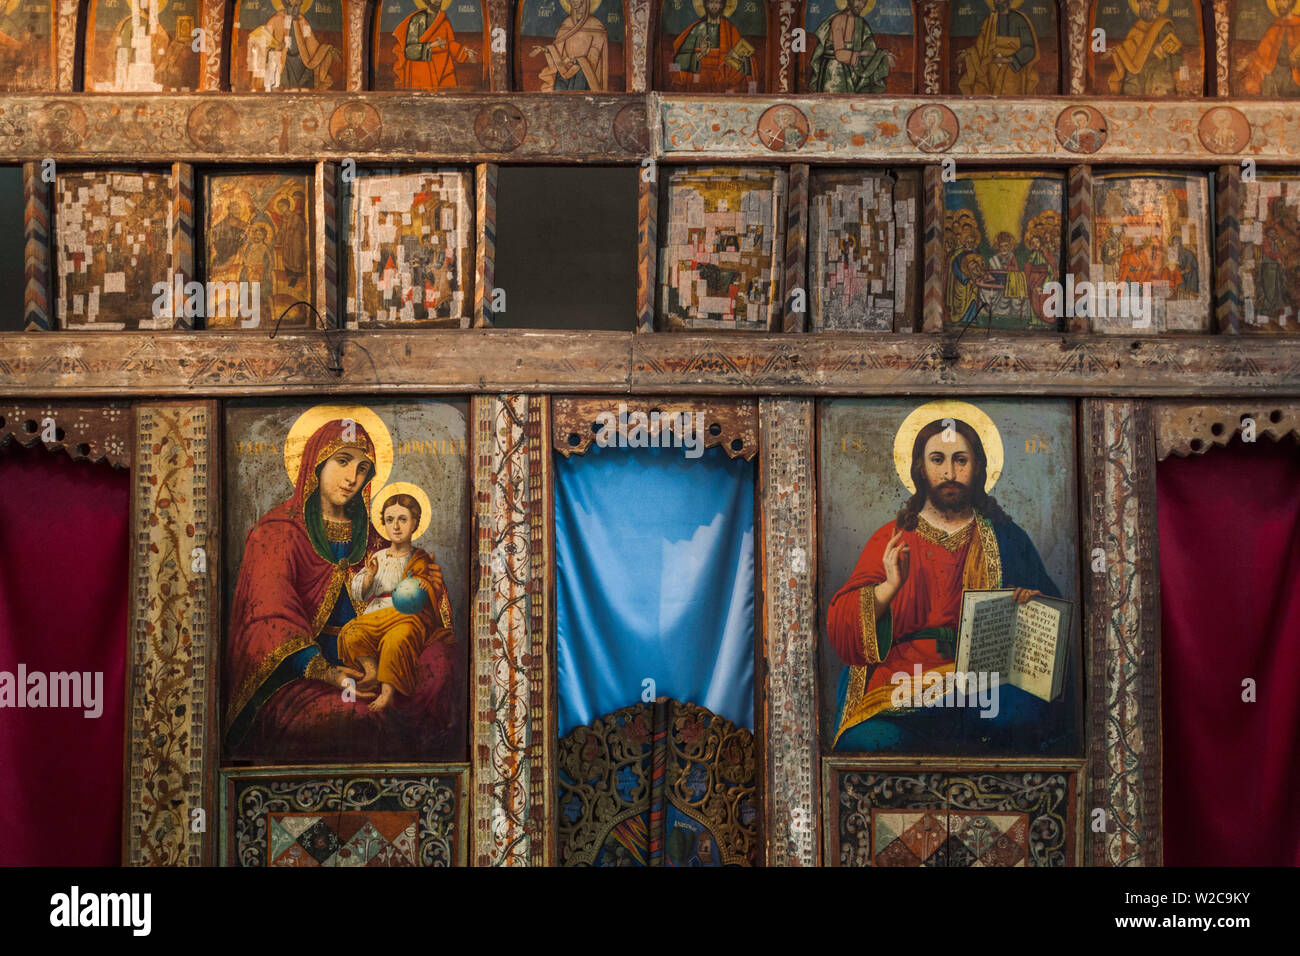 Romania, Bucharest, Museum of the Romanian Peasant, Romanian Orthodox church altar, religious paintings of Virgin Mary and Jesus Christ Stock Photo